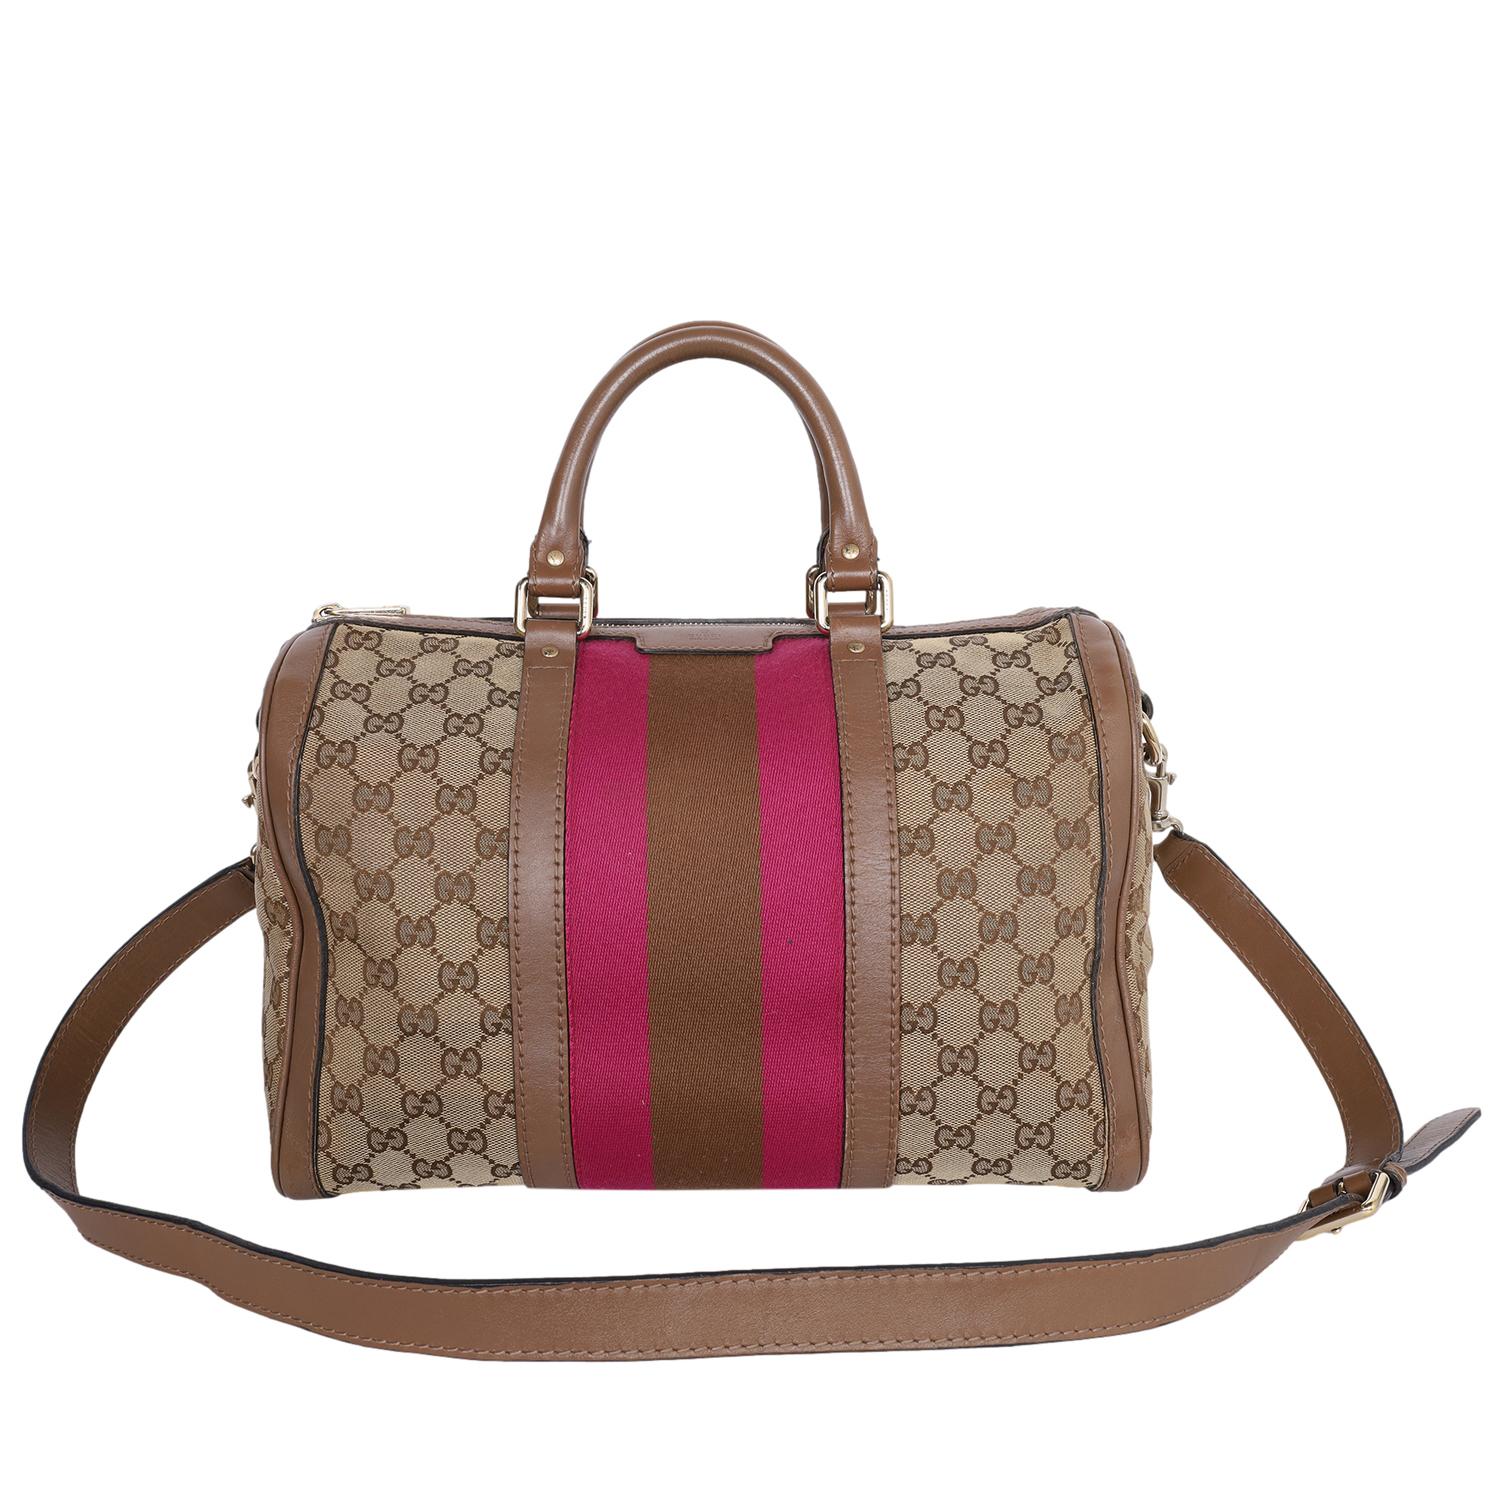 Authentic, pre-owned Gucci web Boston GG canvas leather cross body bag. This classic Gucci cross body bag makes a perfect everyday bag. Features GG with pink, brown and pink web stripe, zipper top closure, roomy interior with 2 slip pocket. This